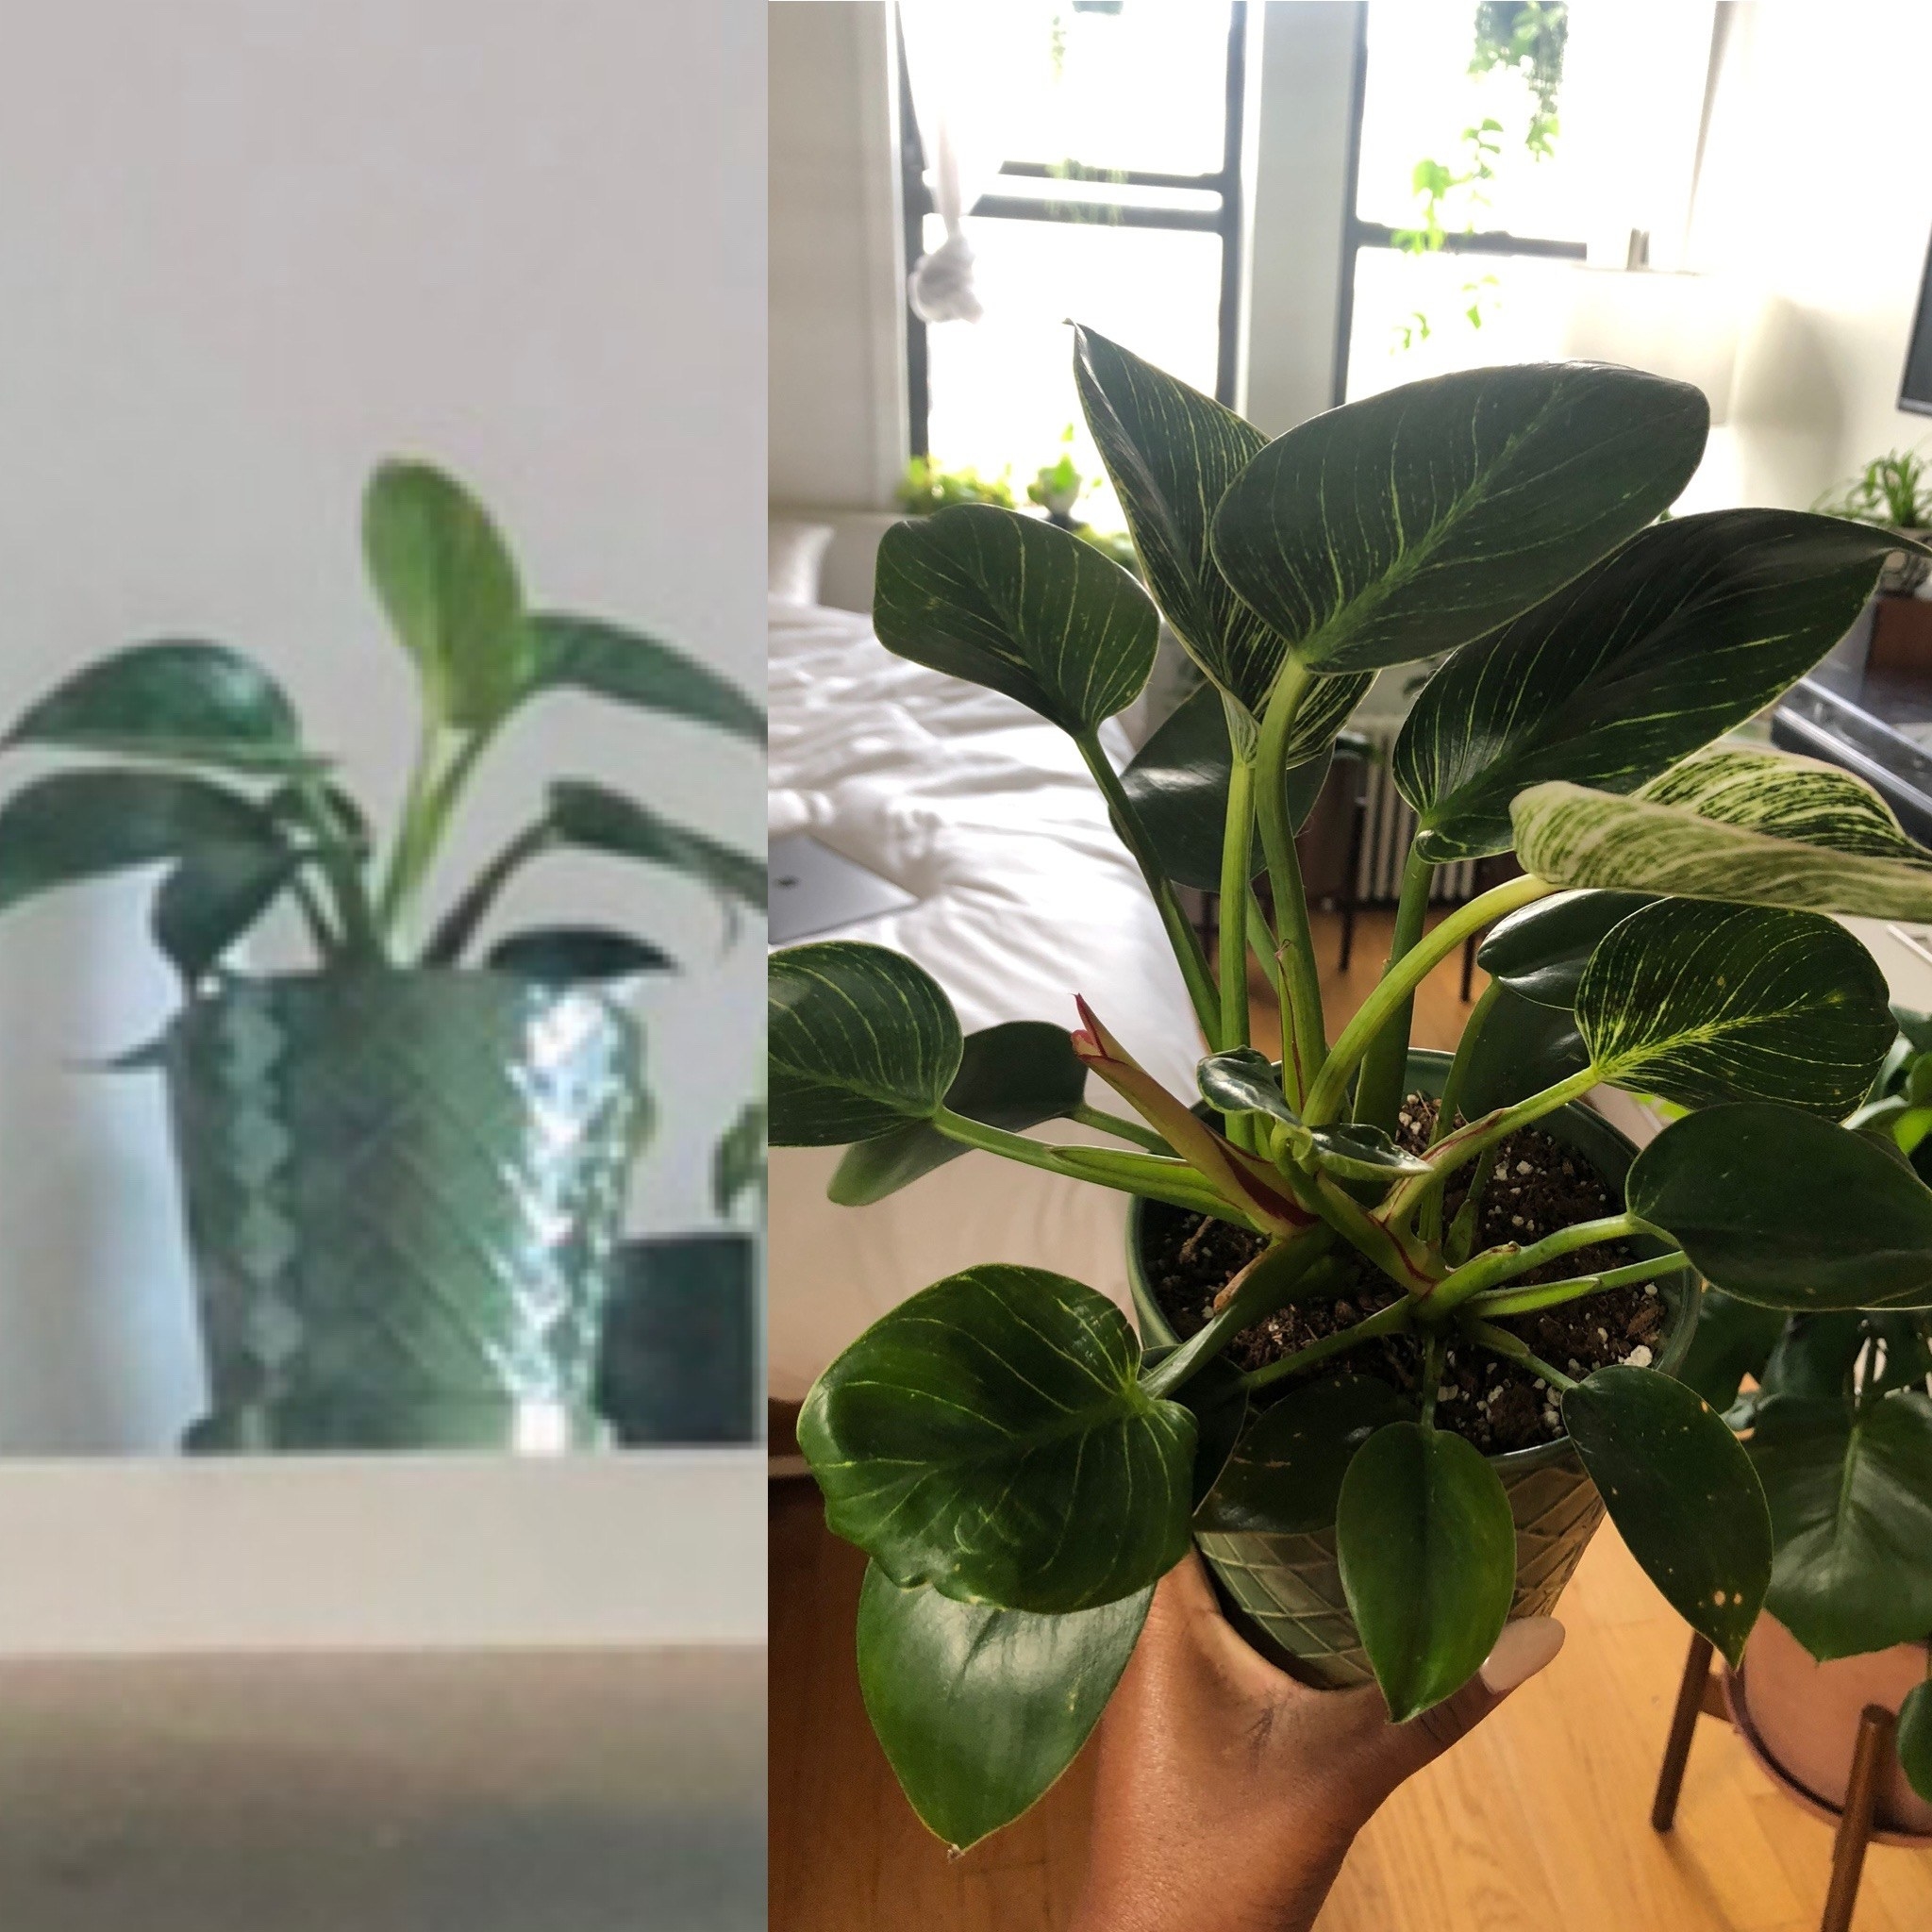 A reviewer&#x27;s plant / A reviewer&#x27;s larger plant after 4 months of growth